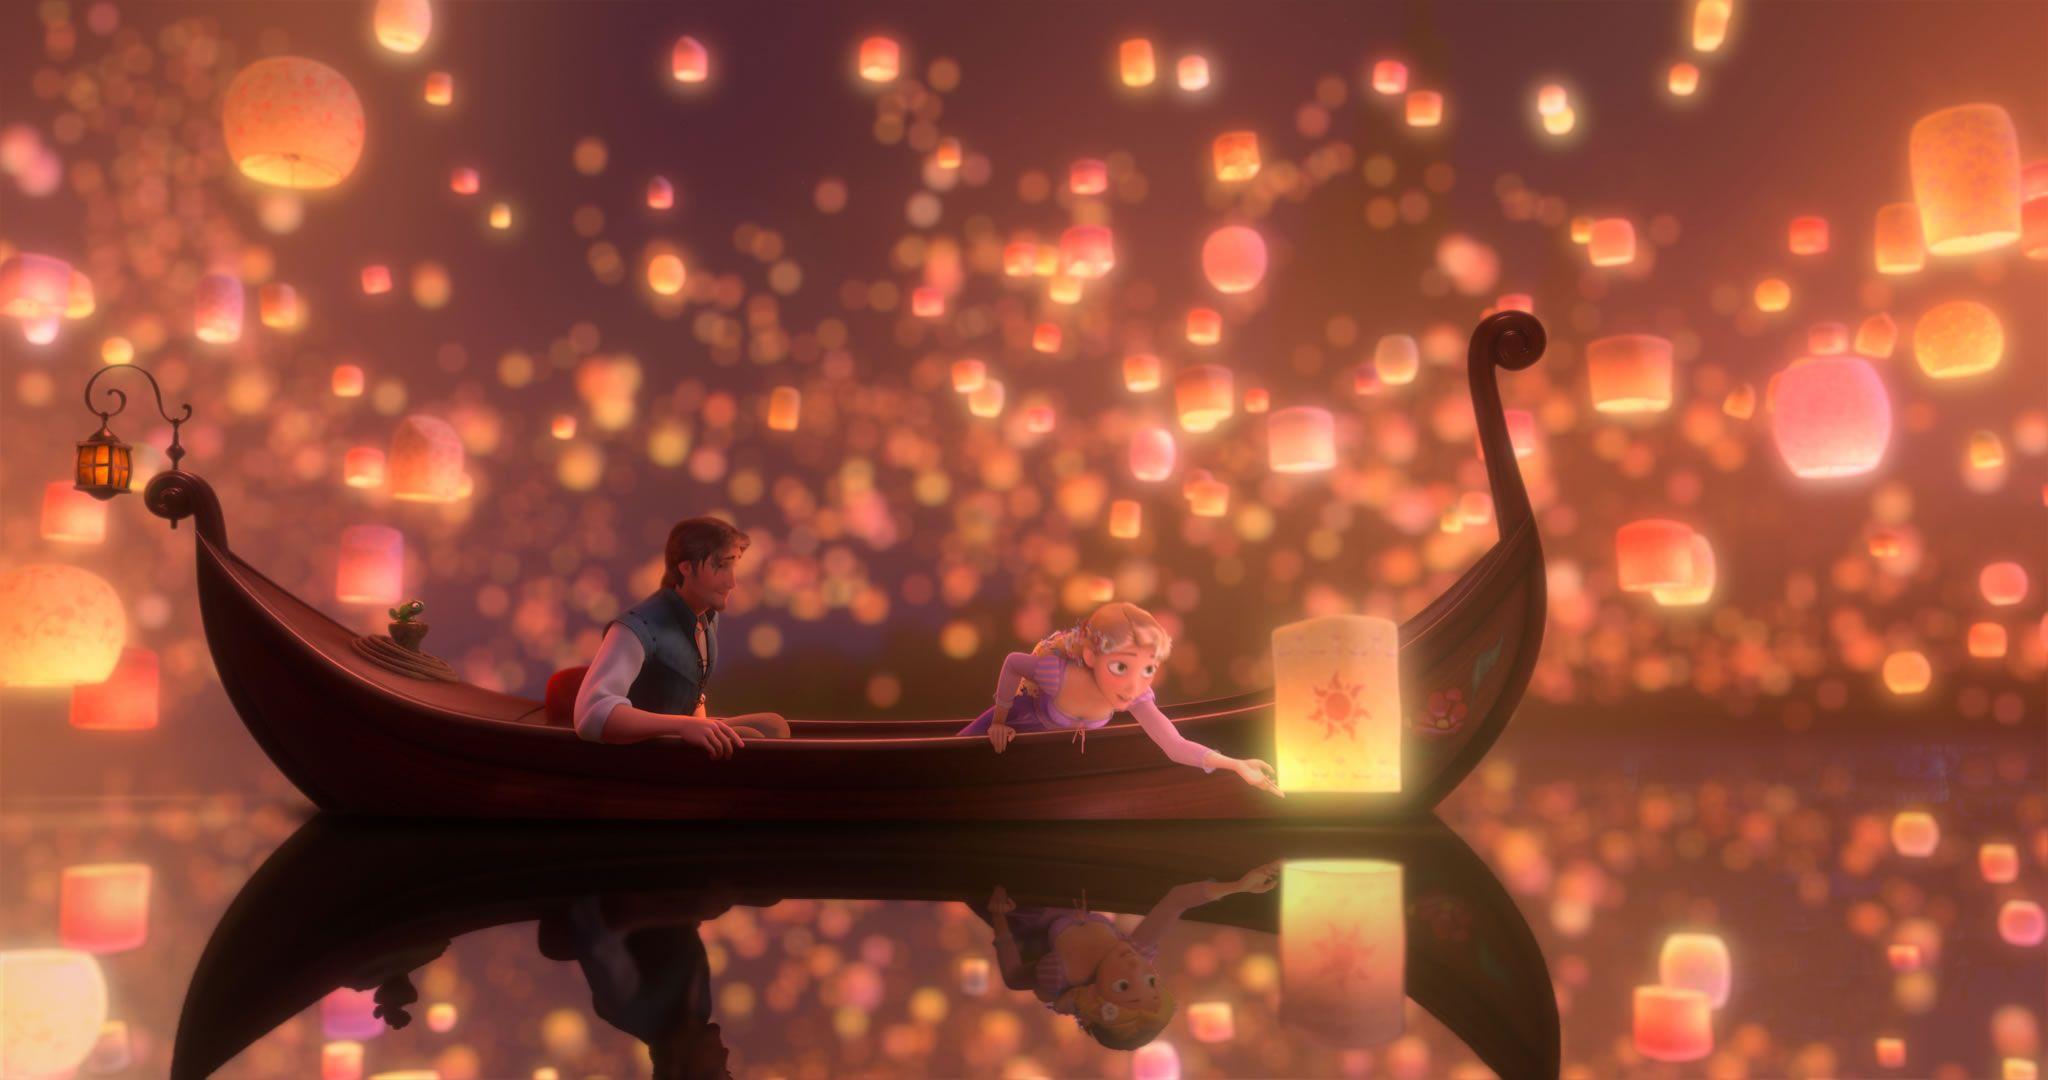 Tangled HD Wallpaper Background For Free Download, B.SCB